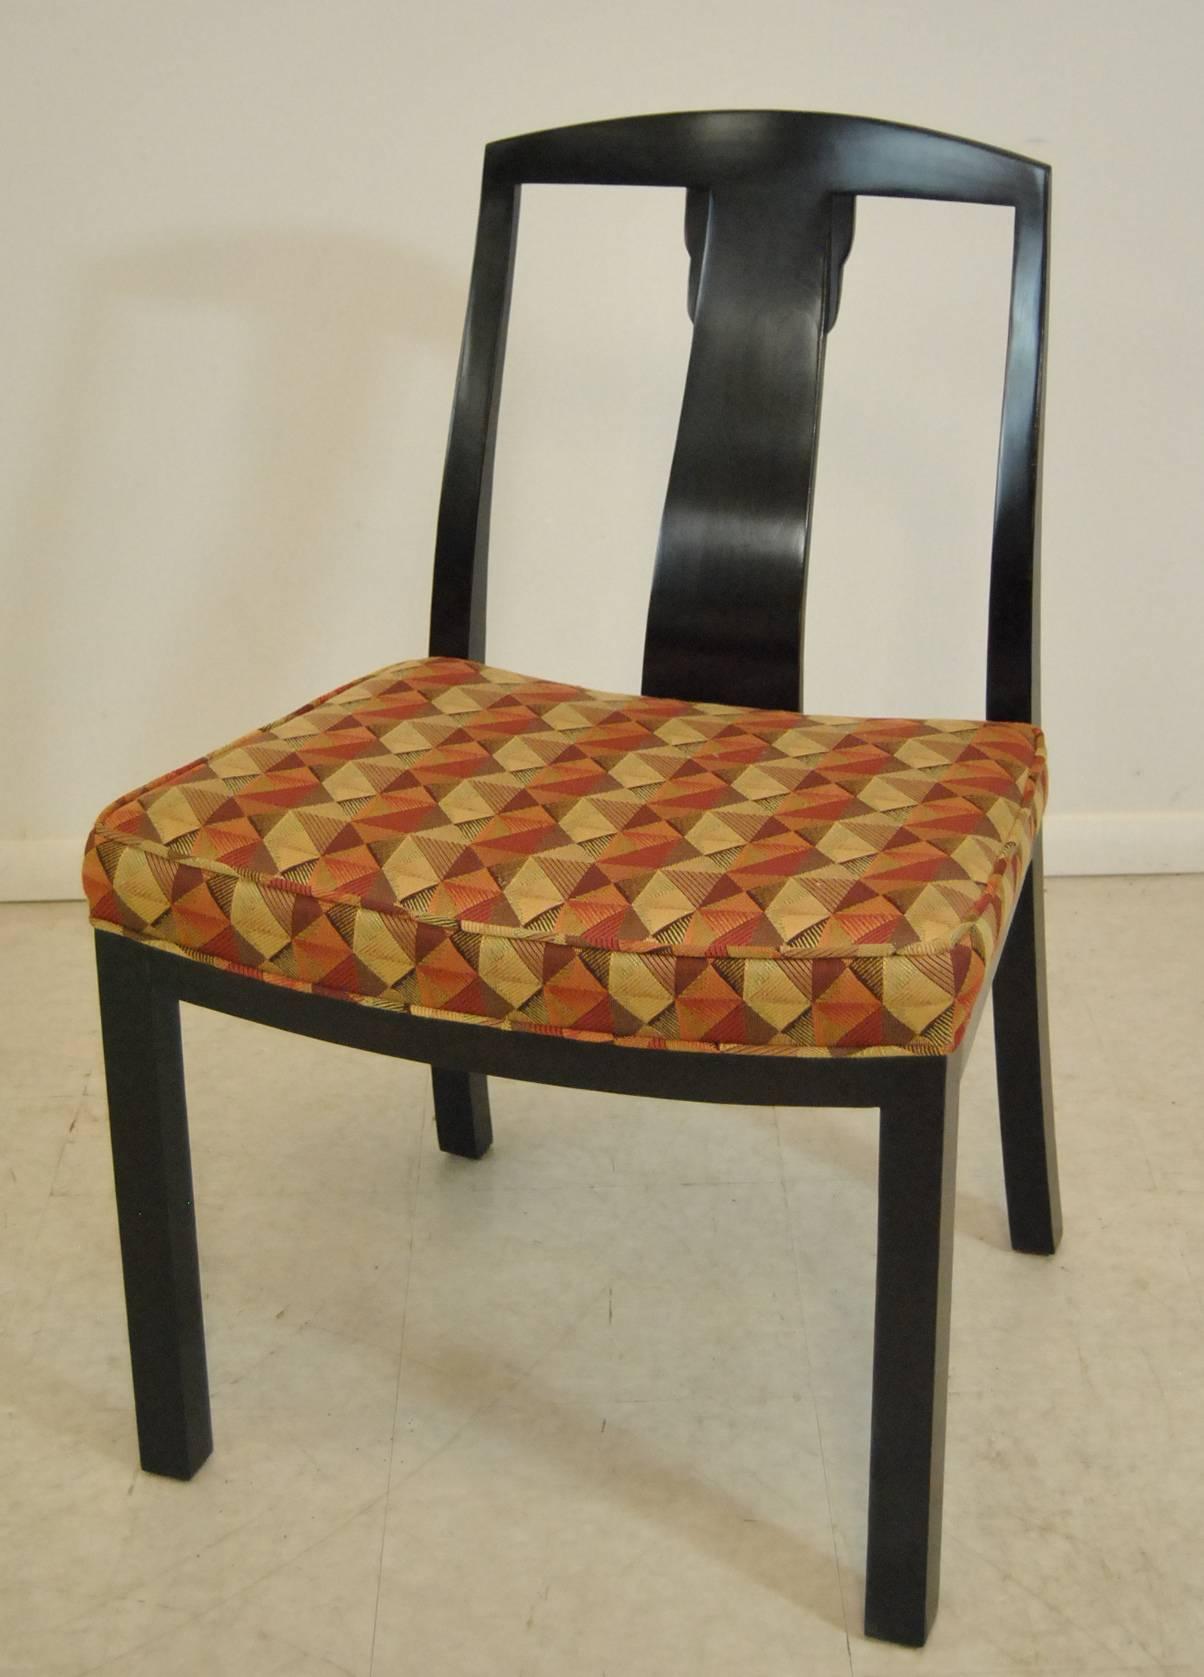 An unusual set of six dining chairs by Baker. Chairs are done in a dark espresso finish with upholstered seats. Unusual splat with Asian flair adds interest to the clean lines of these Mid-Century Modern chairs.